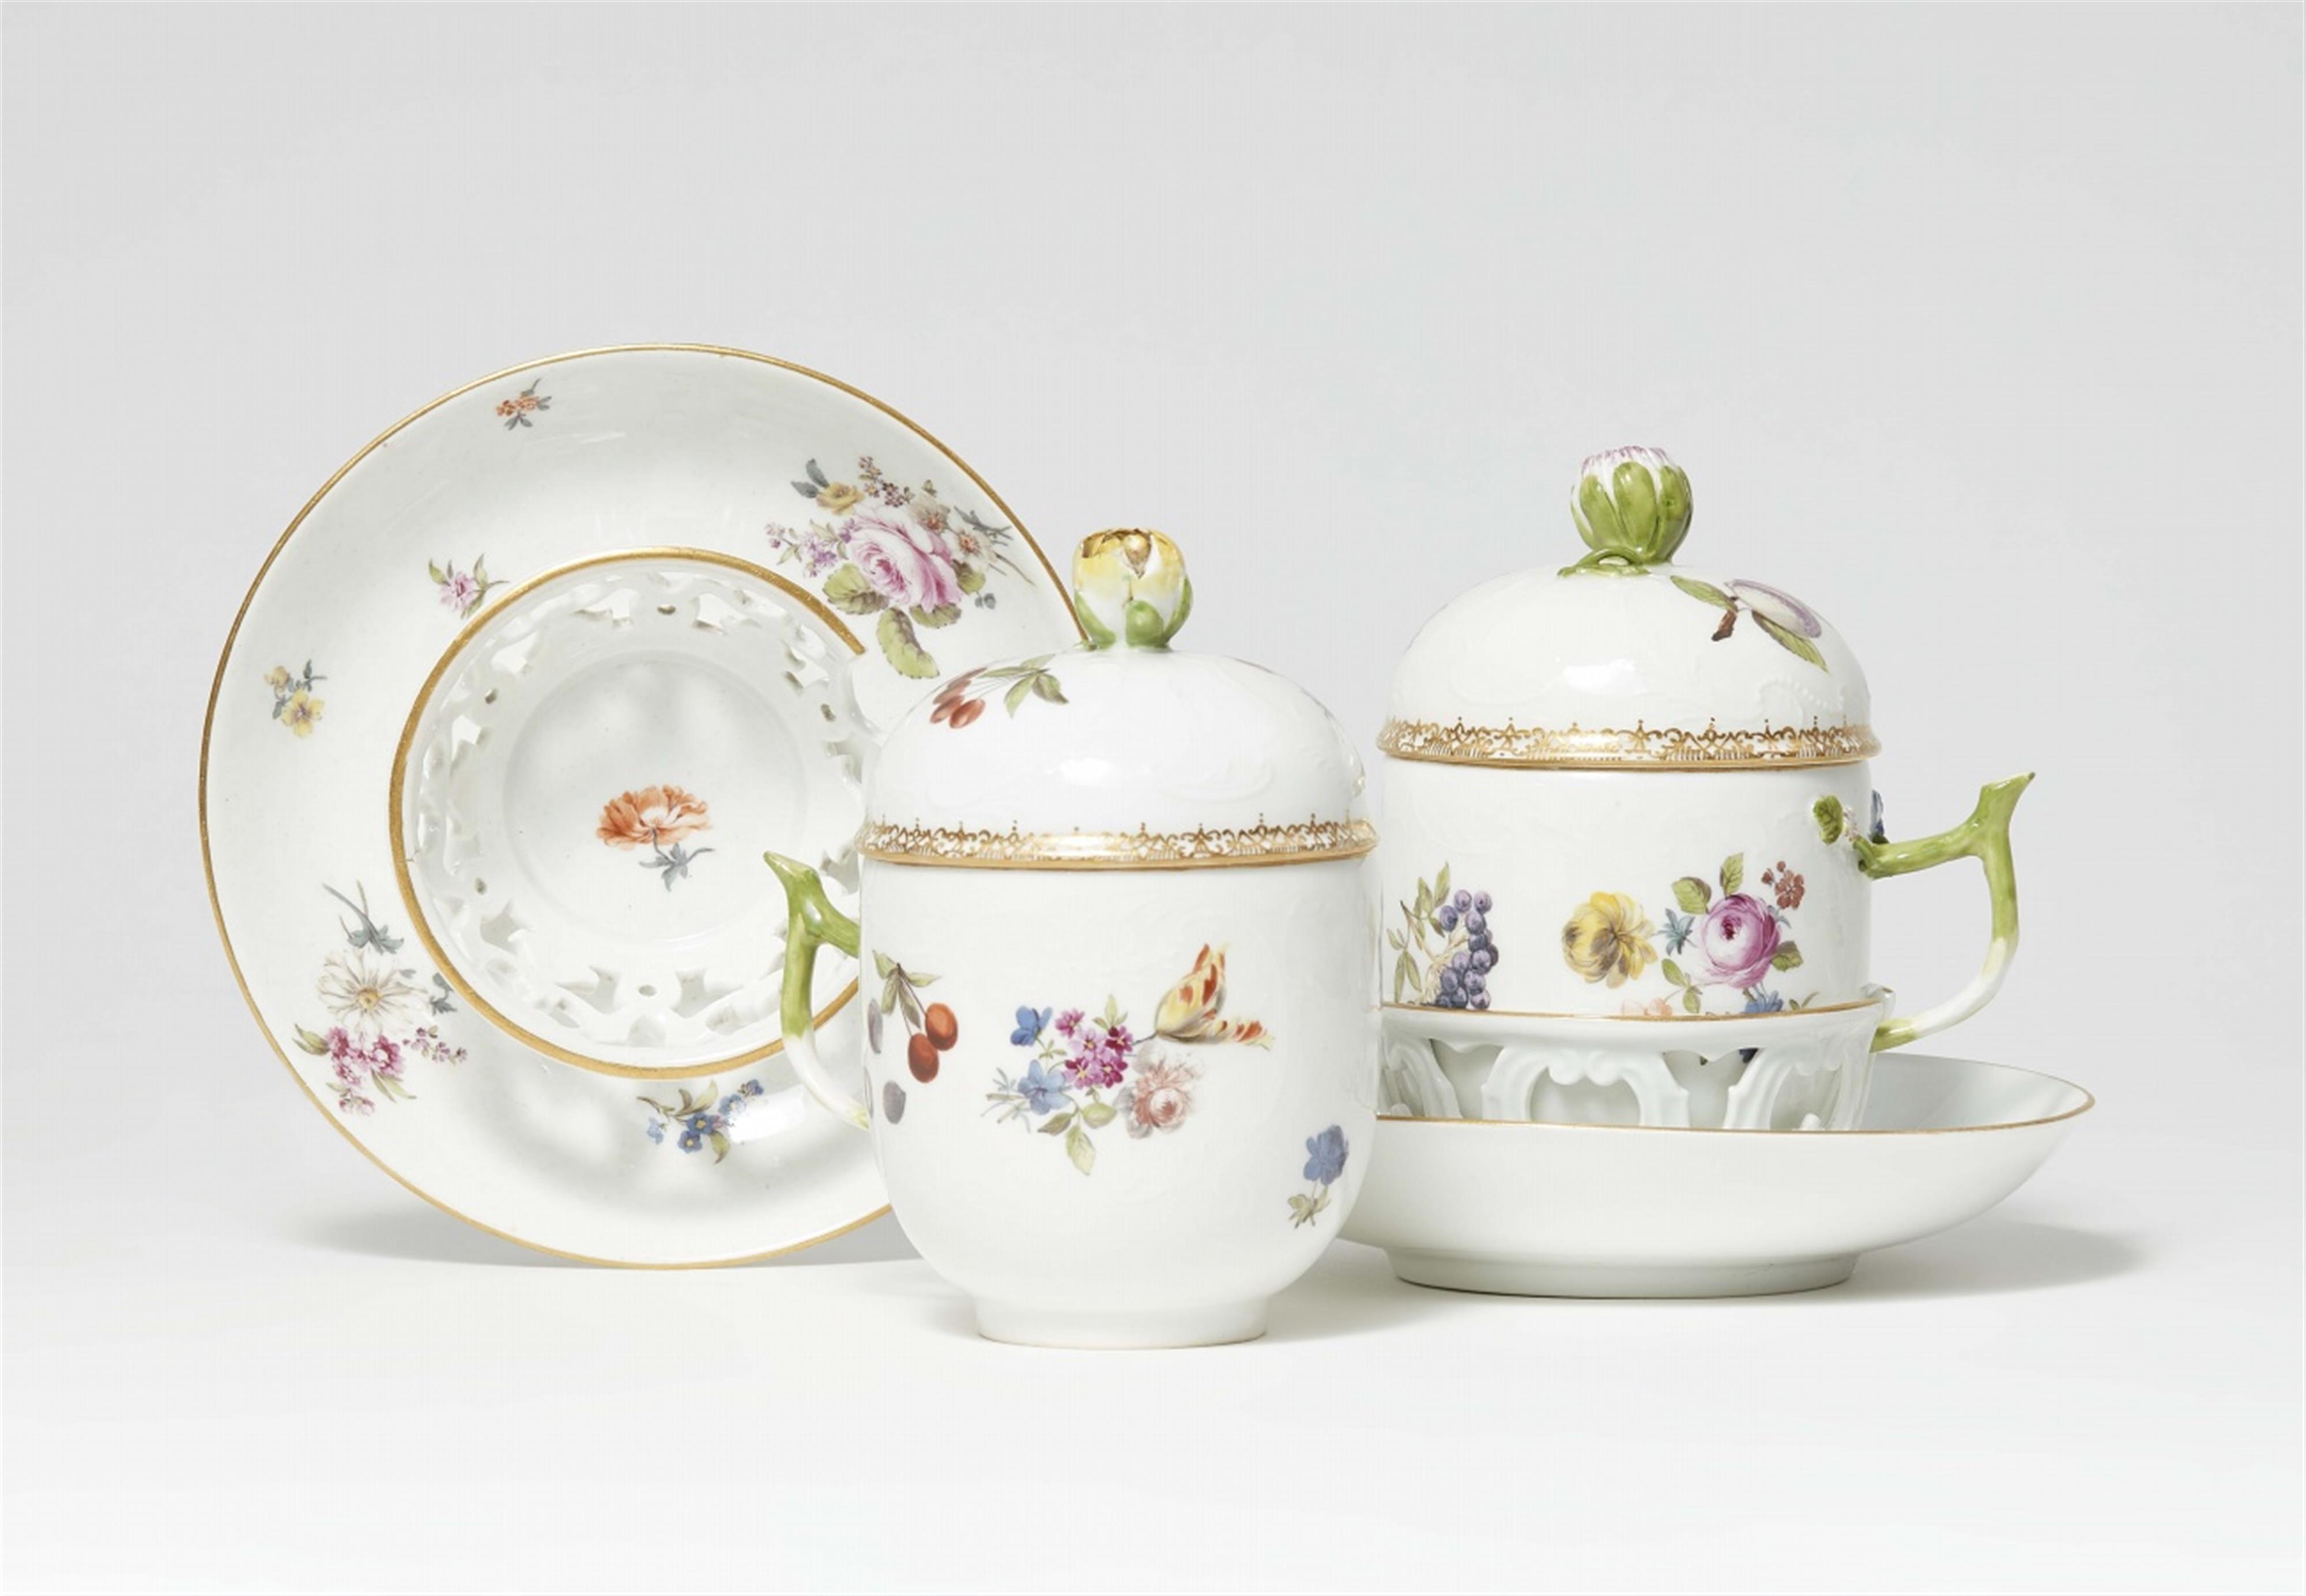 A pair of rare Meissen porcelain trembleuse cups with flower and fruit motifs - image-1